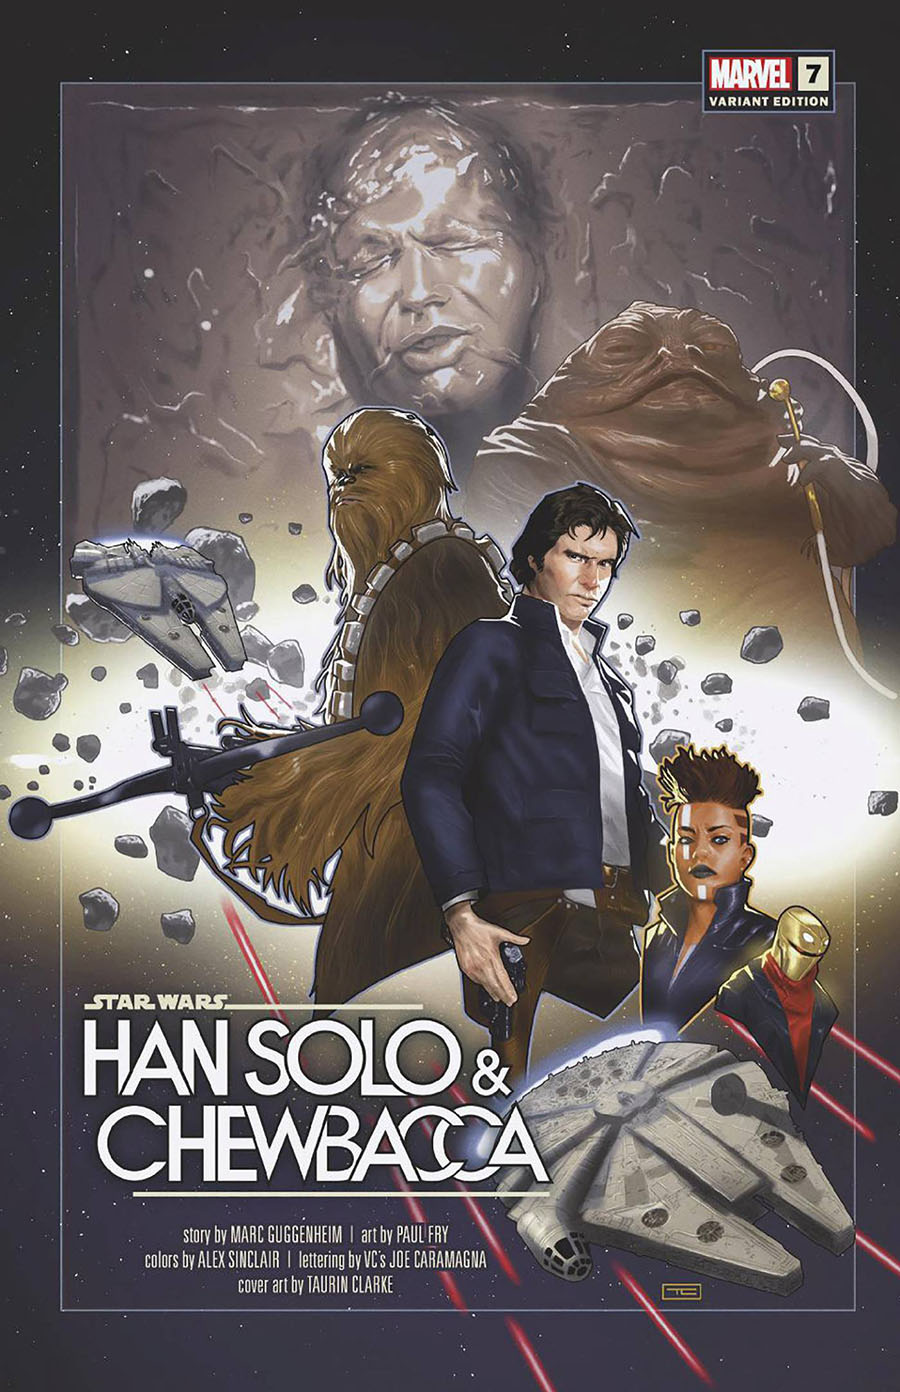 Star Wars Han Solo & Chewbacca #7 Cover B Variant Taurin Clarke Revelations Cover